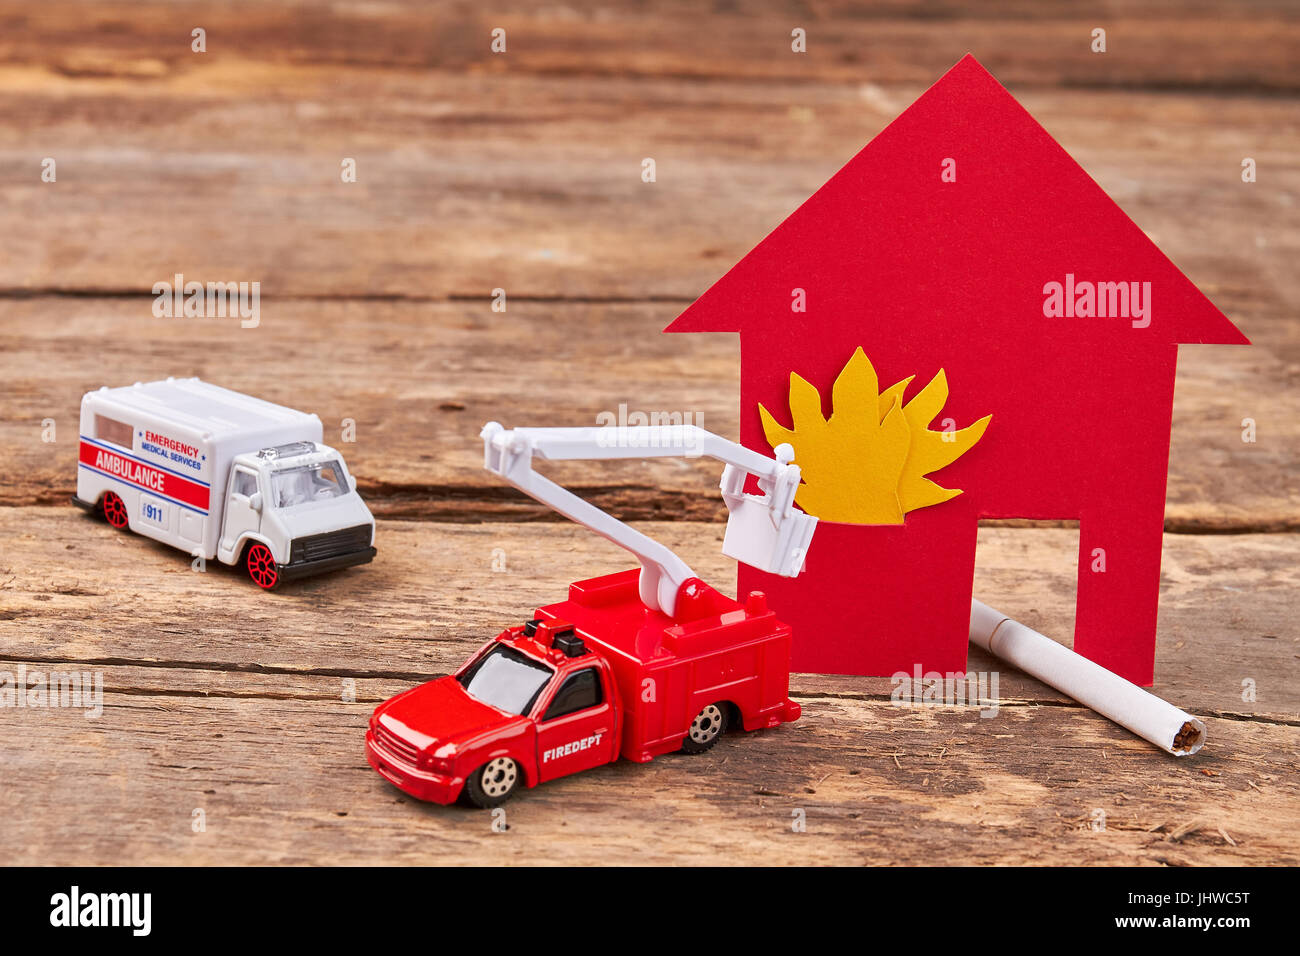 Toy ambulance, fire truck, flame. Stock Photo